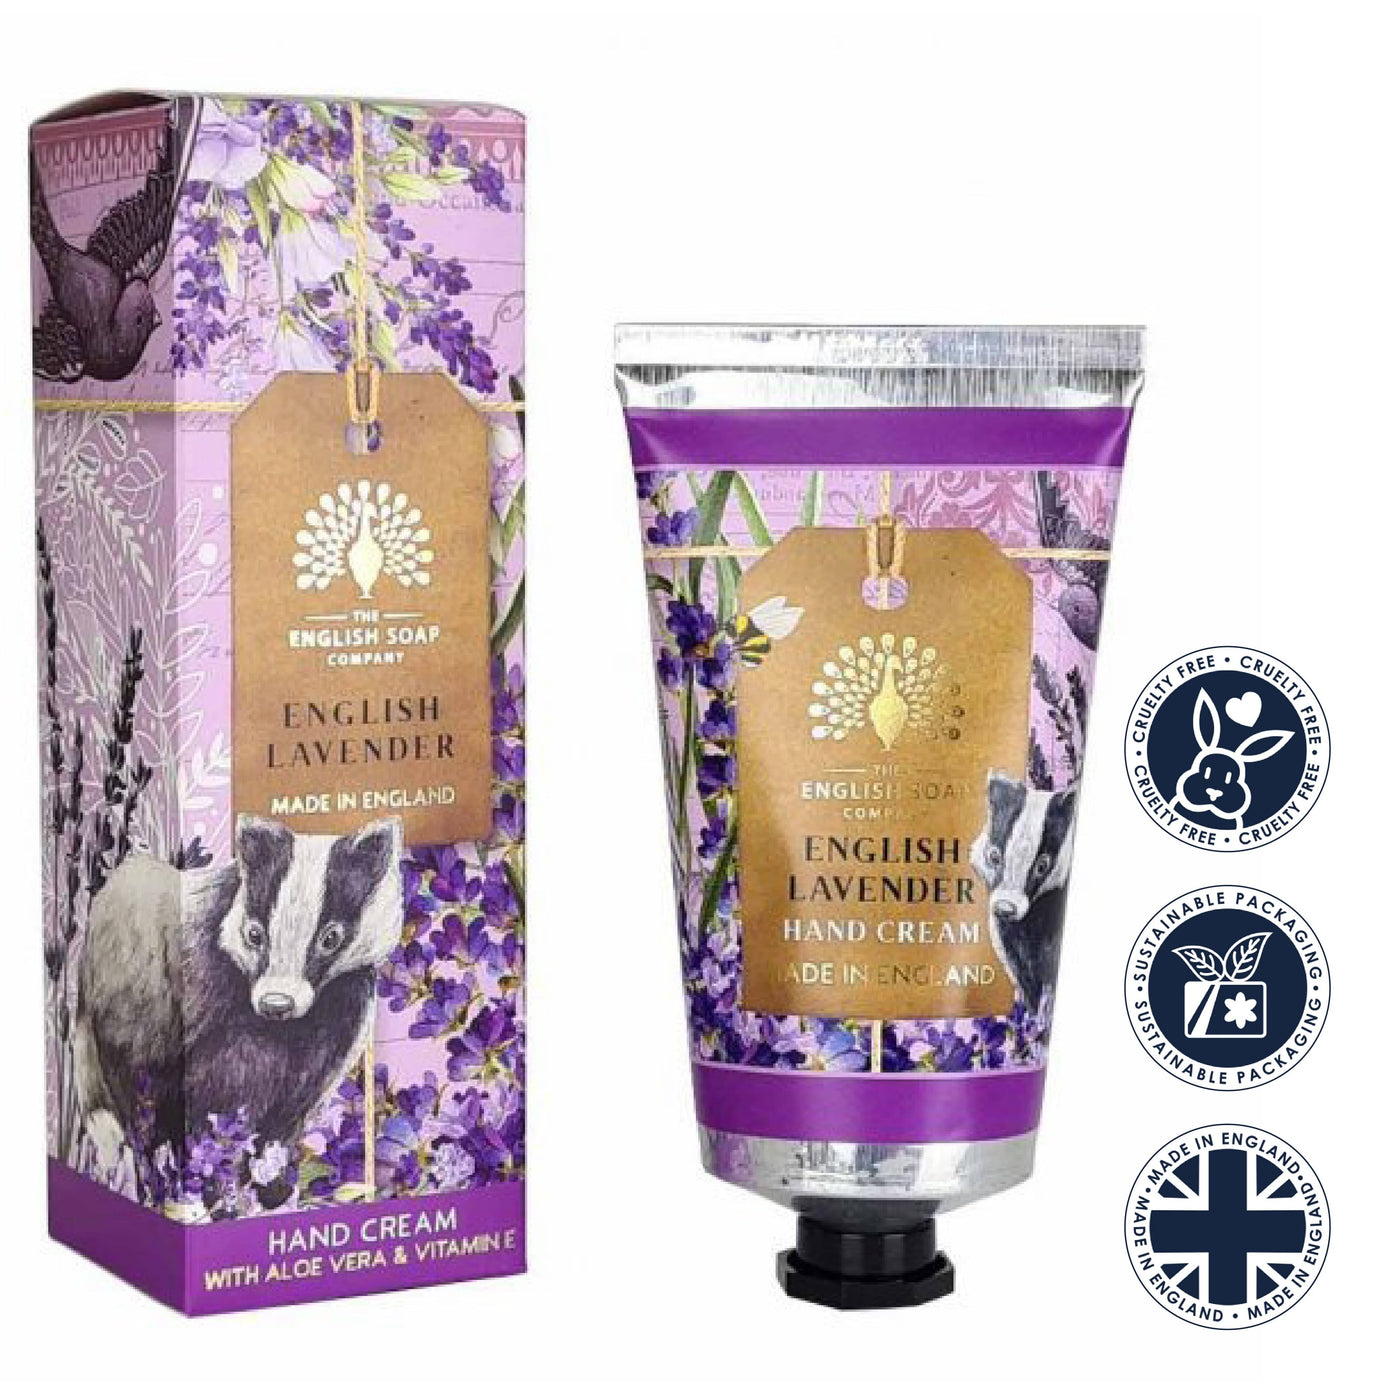 English Lavender Hand Cream 75ml from our Hand Cream collection by The English Soap Company